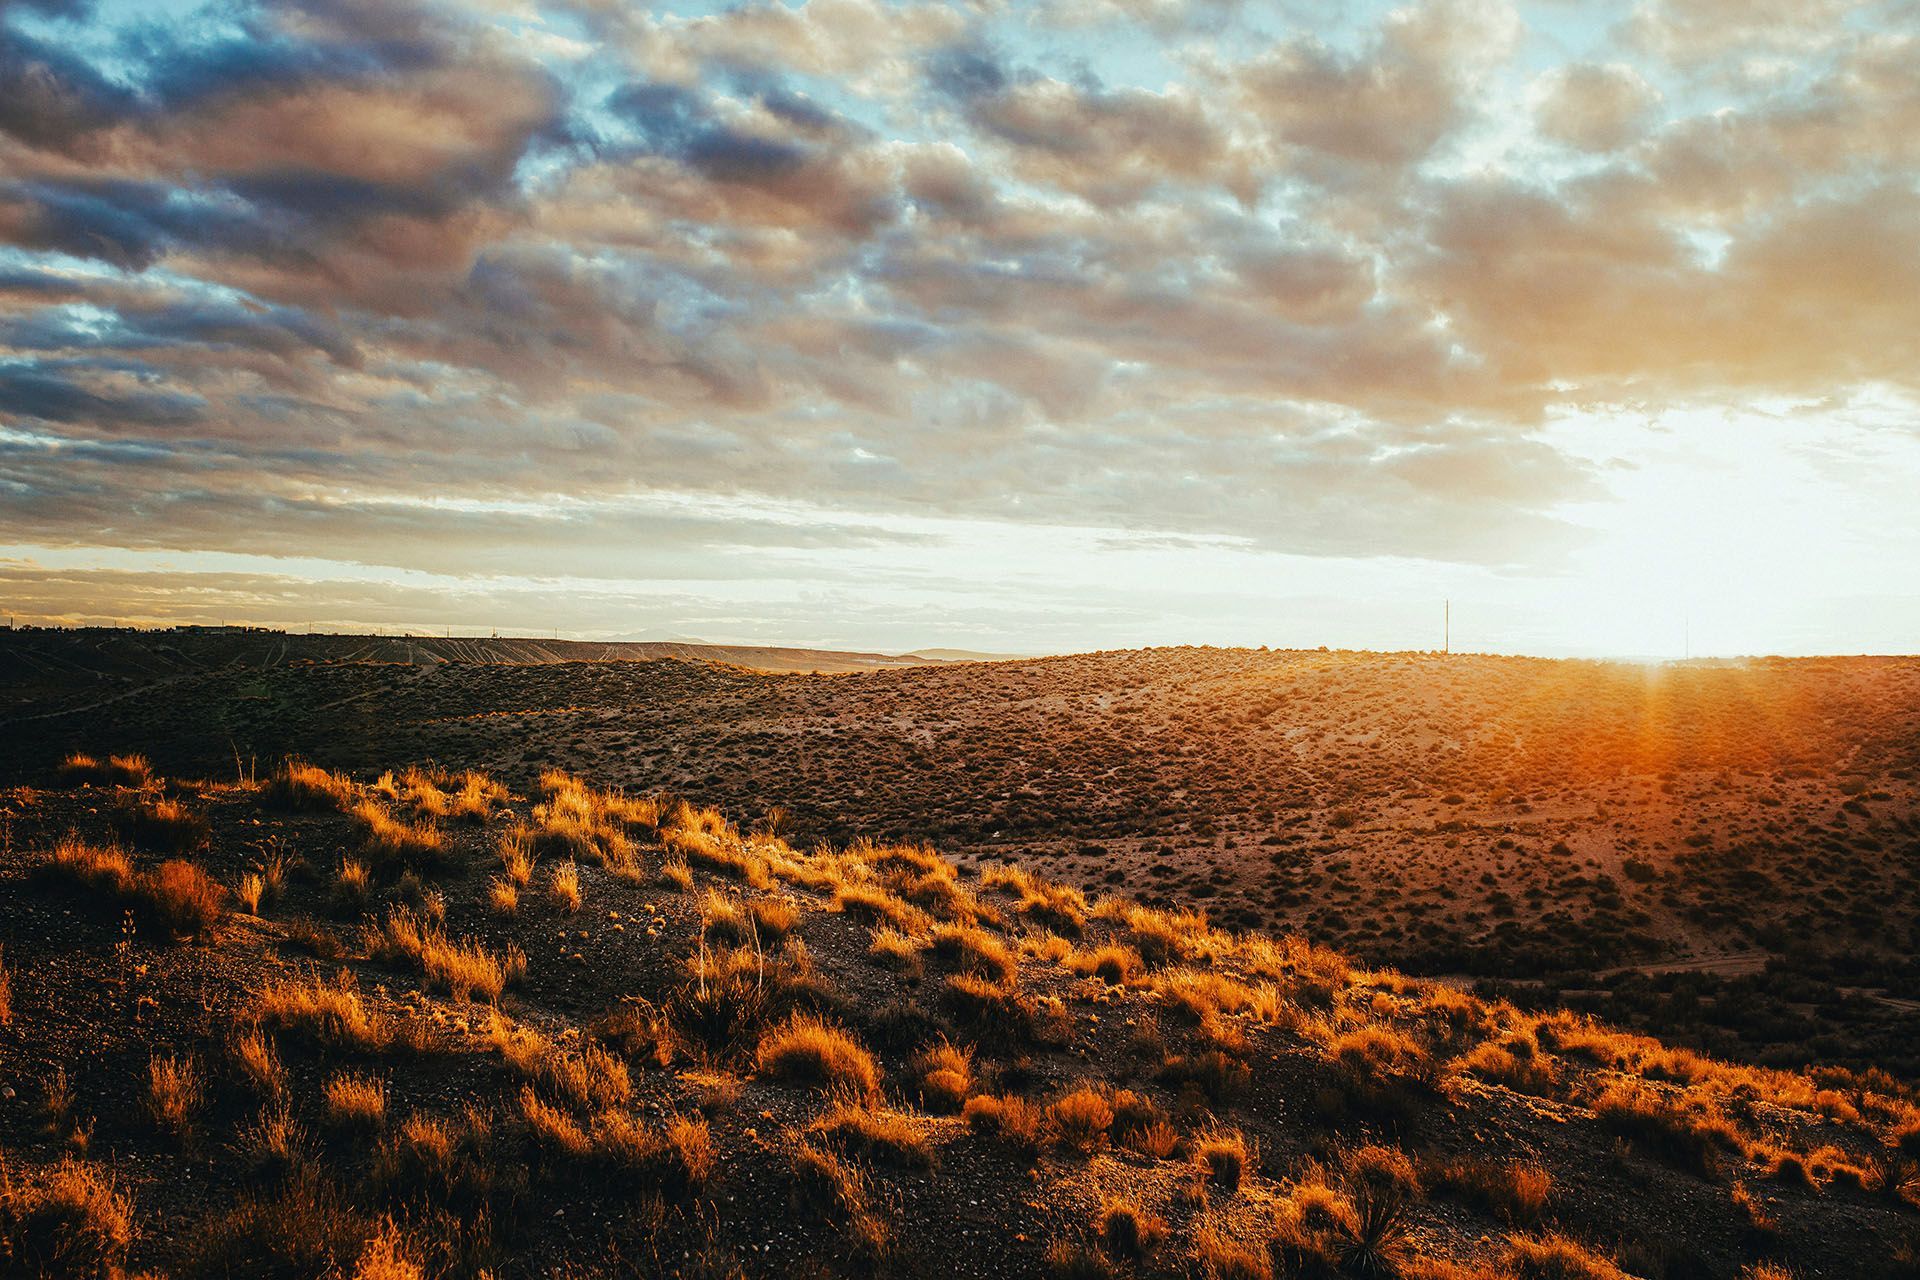 the sun is setting over a desert landscape with a cloudy sky .